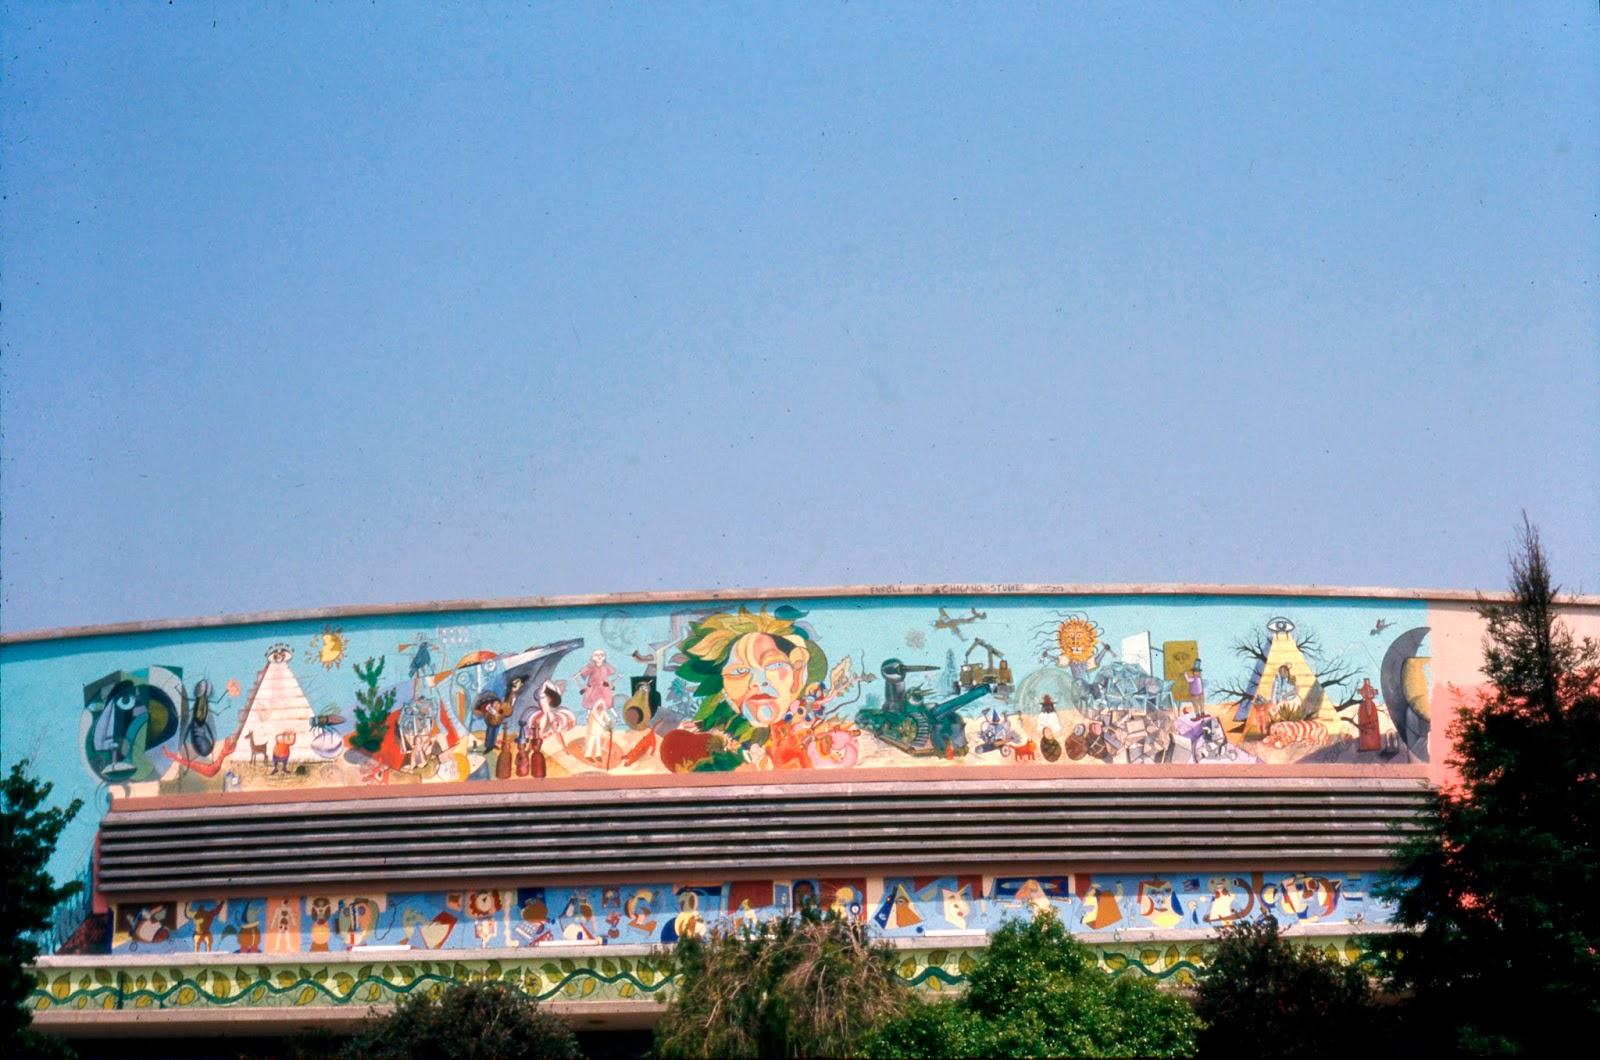 Less than five years after its completion, Roberto Chávez’s The Path to Knowledge and the False University(1974–75) was completely obliterated by the college administration that had originally commissioned it.